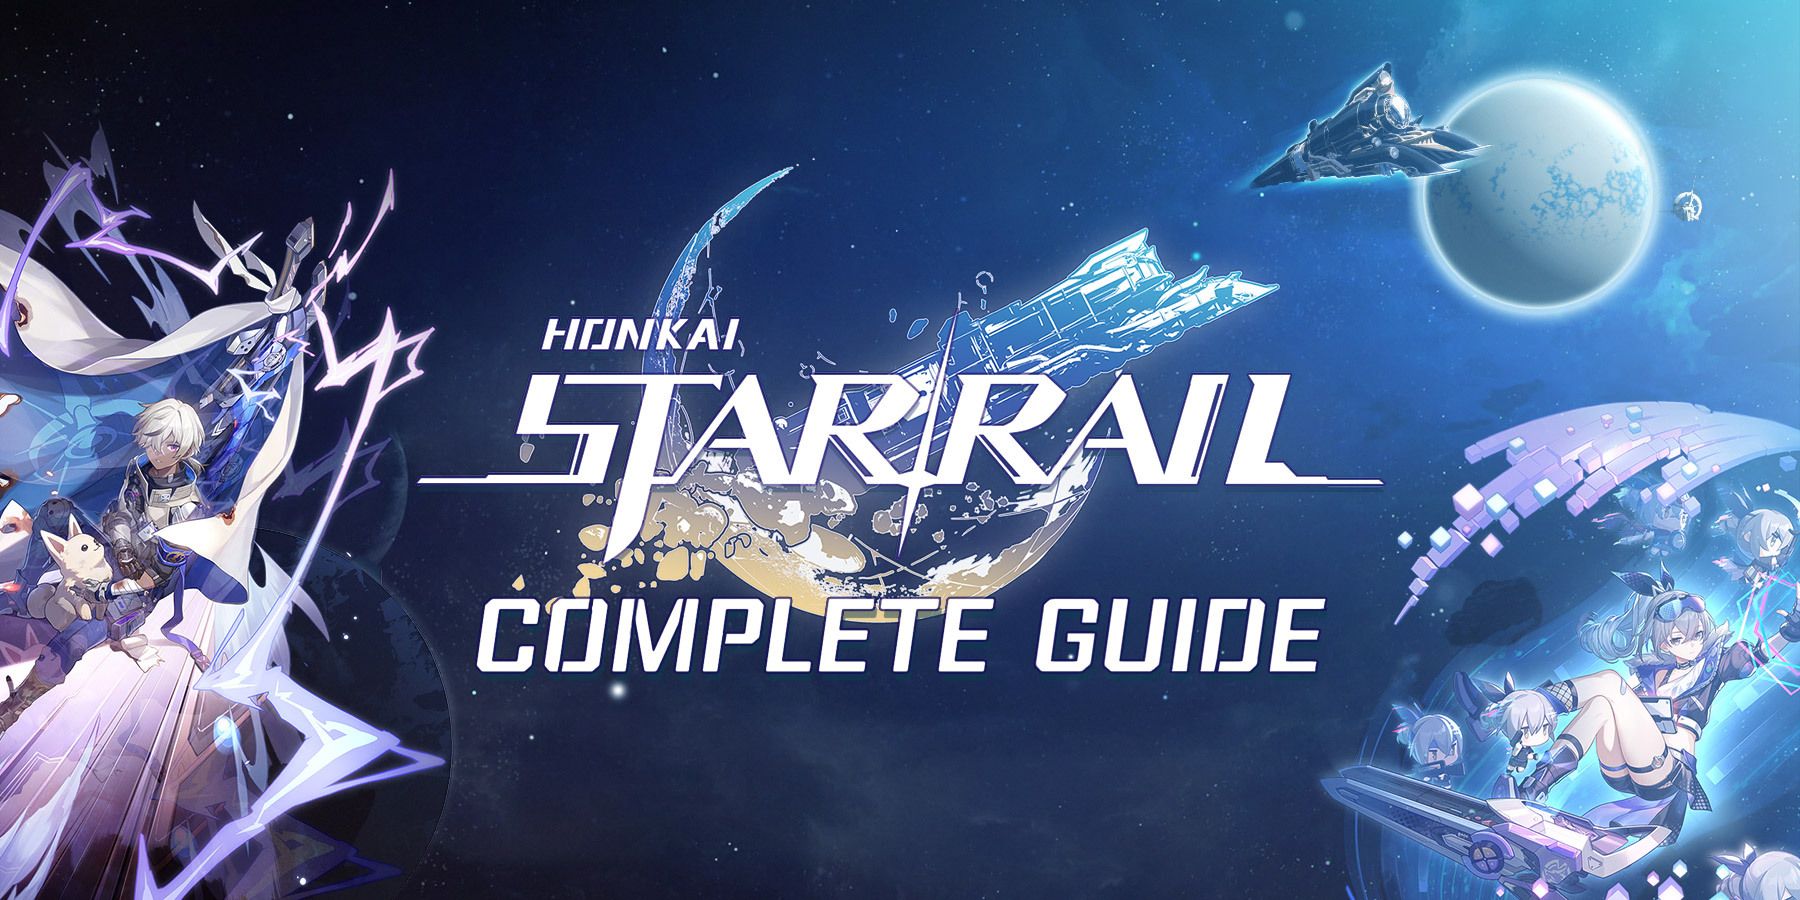 Star Rail Leak Reveals New Simulated Universe Curios for Version 1.6